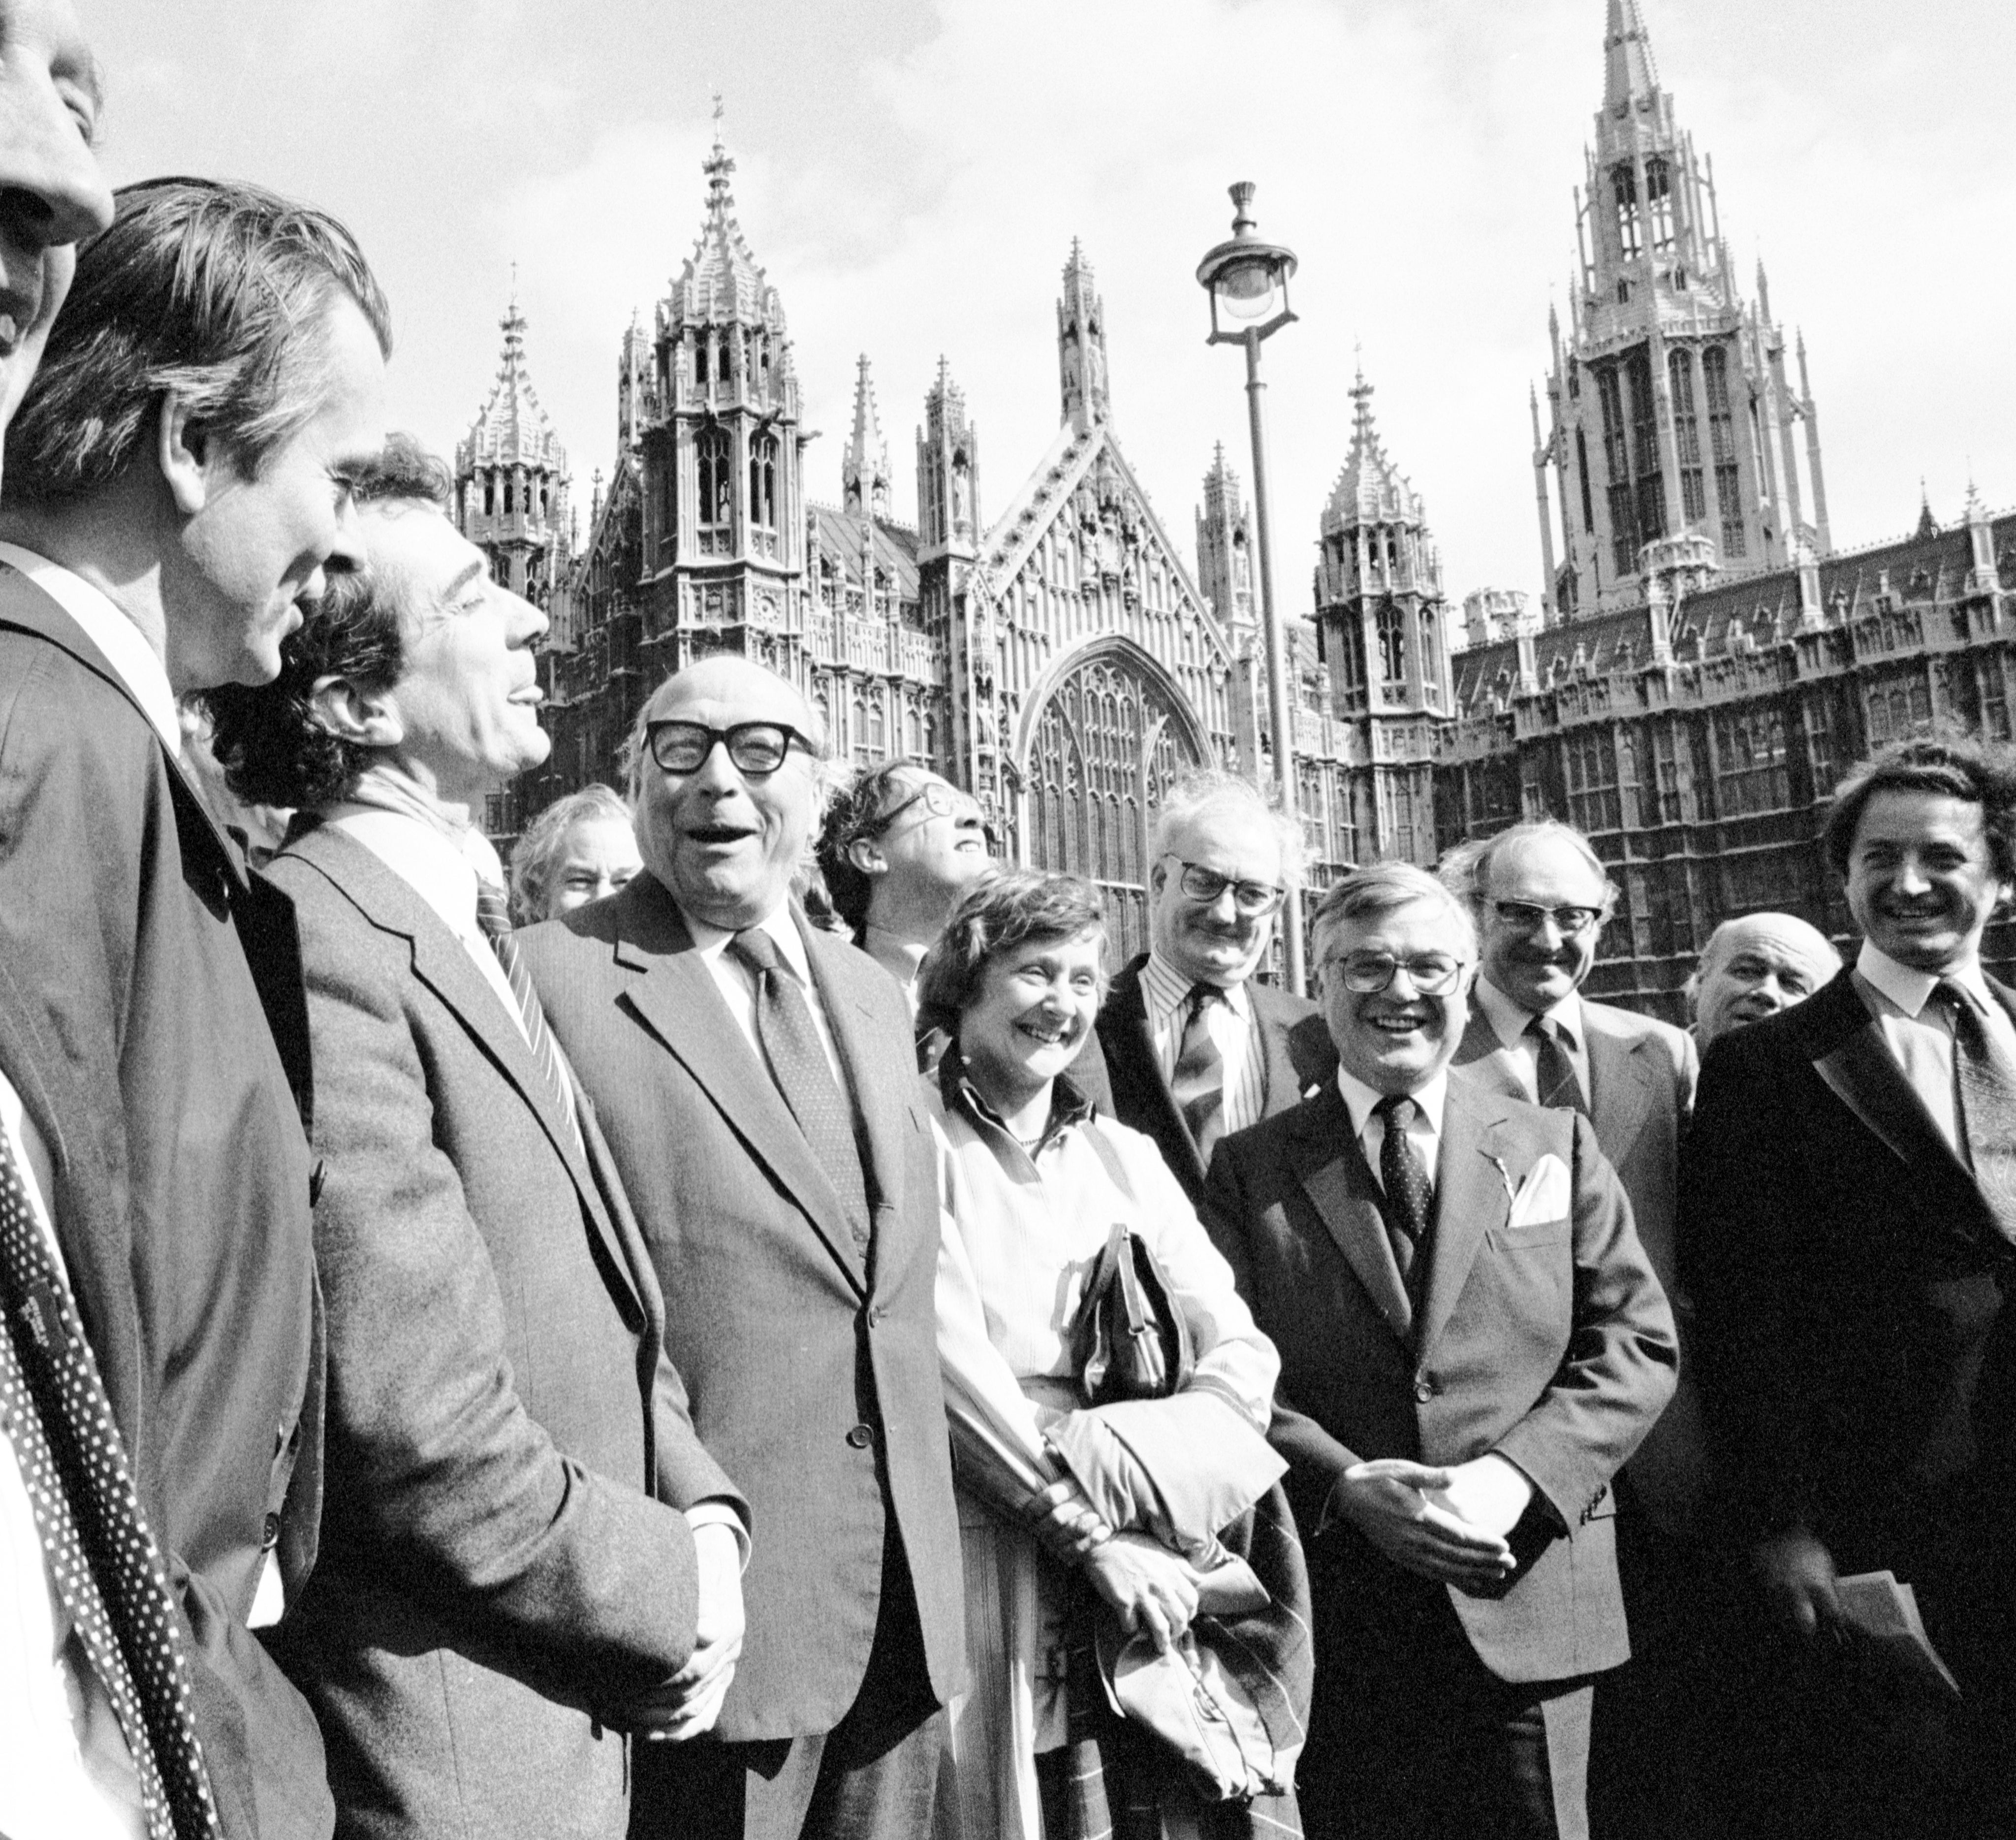 Members of the SDP outside the House of Commons in March 1982, including Roy Jenkins (third left) who had recently won a by-election in Glasgow, along with co-founders (left to right) David Owen, Bill Rodgers and Shirley Williams (PA)